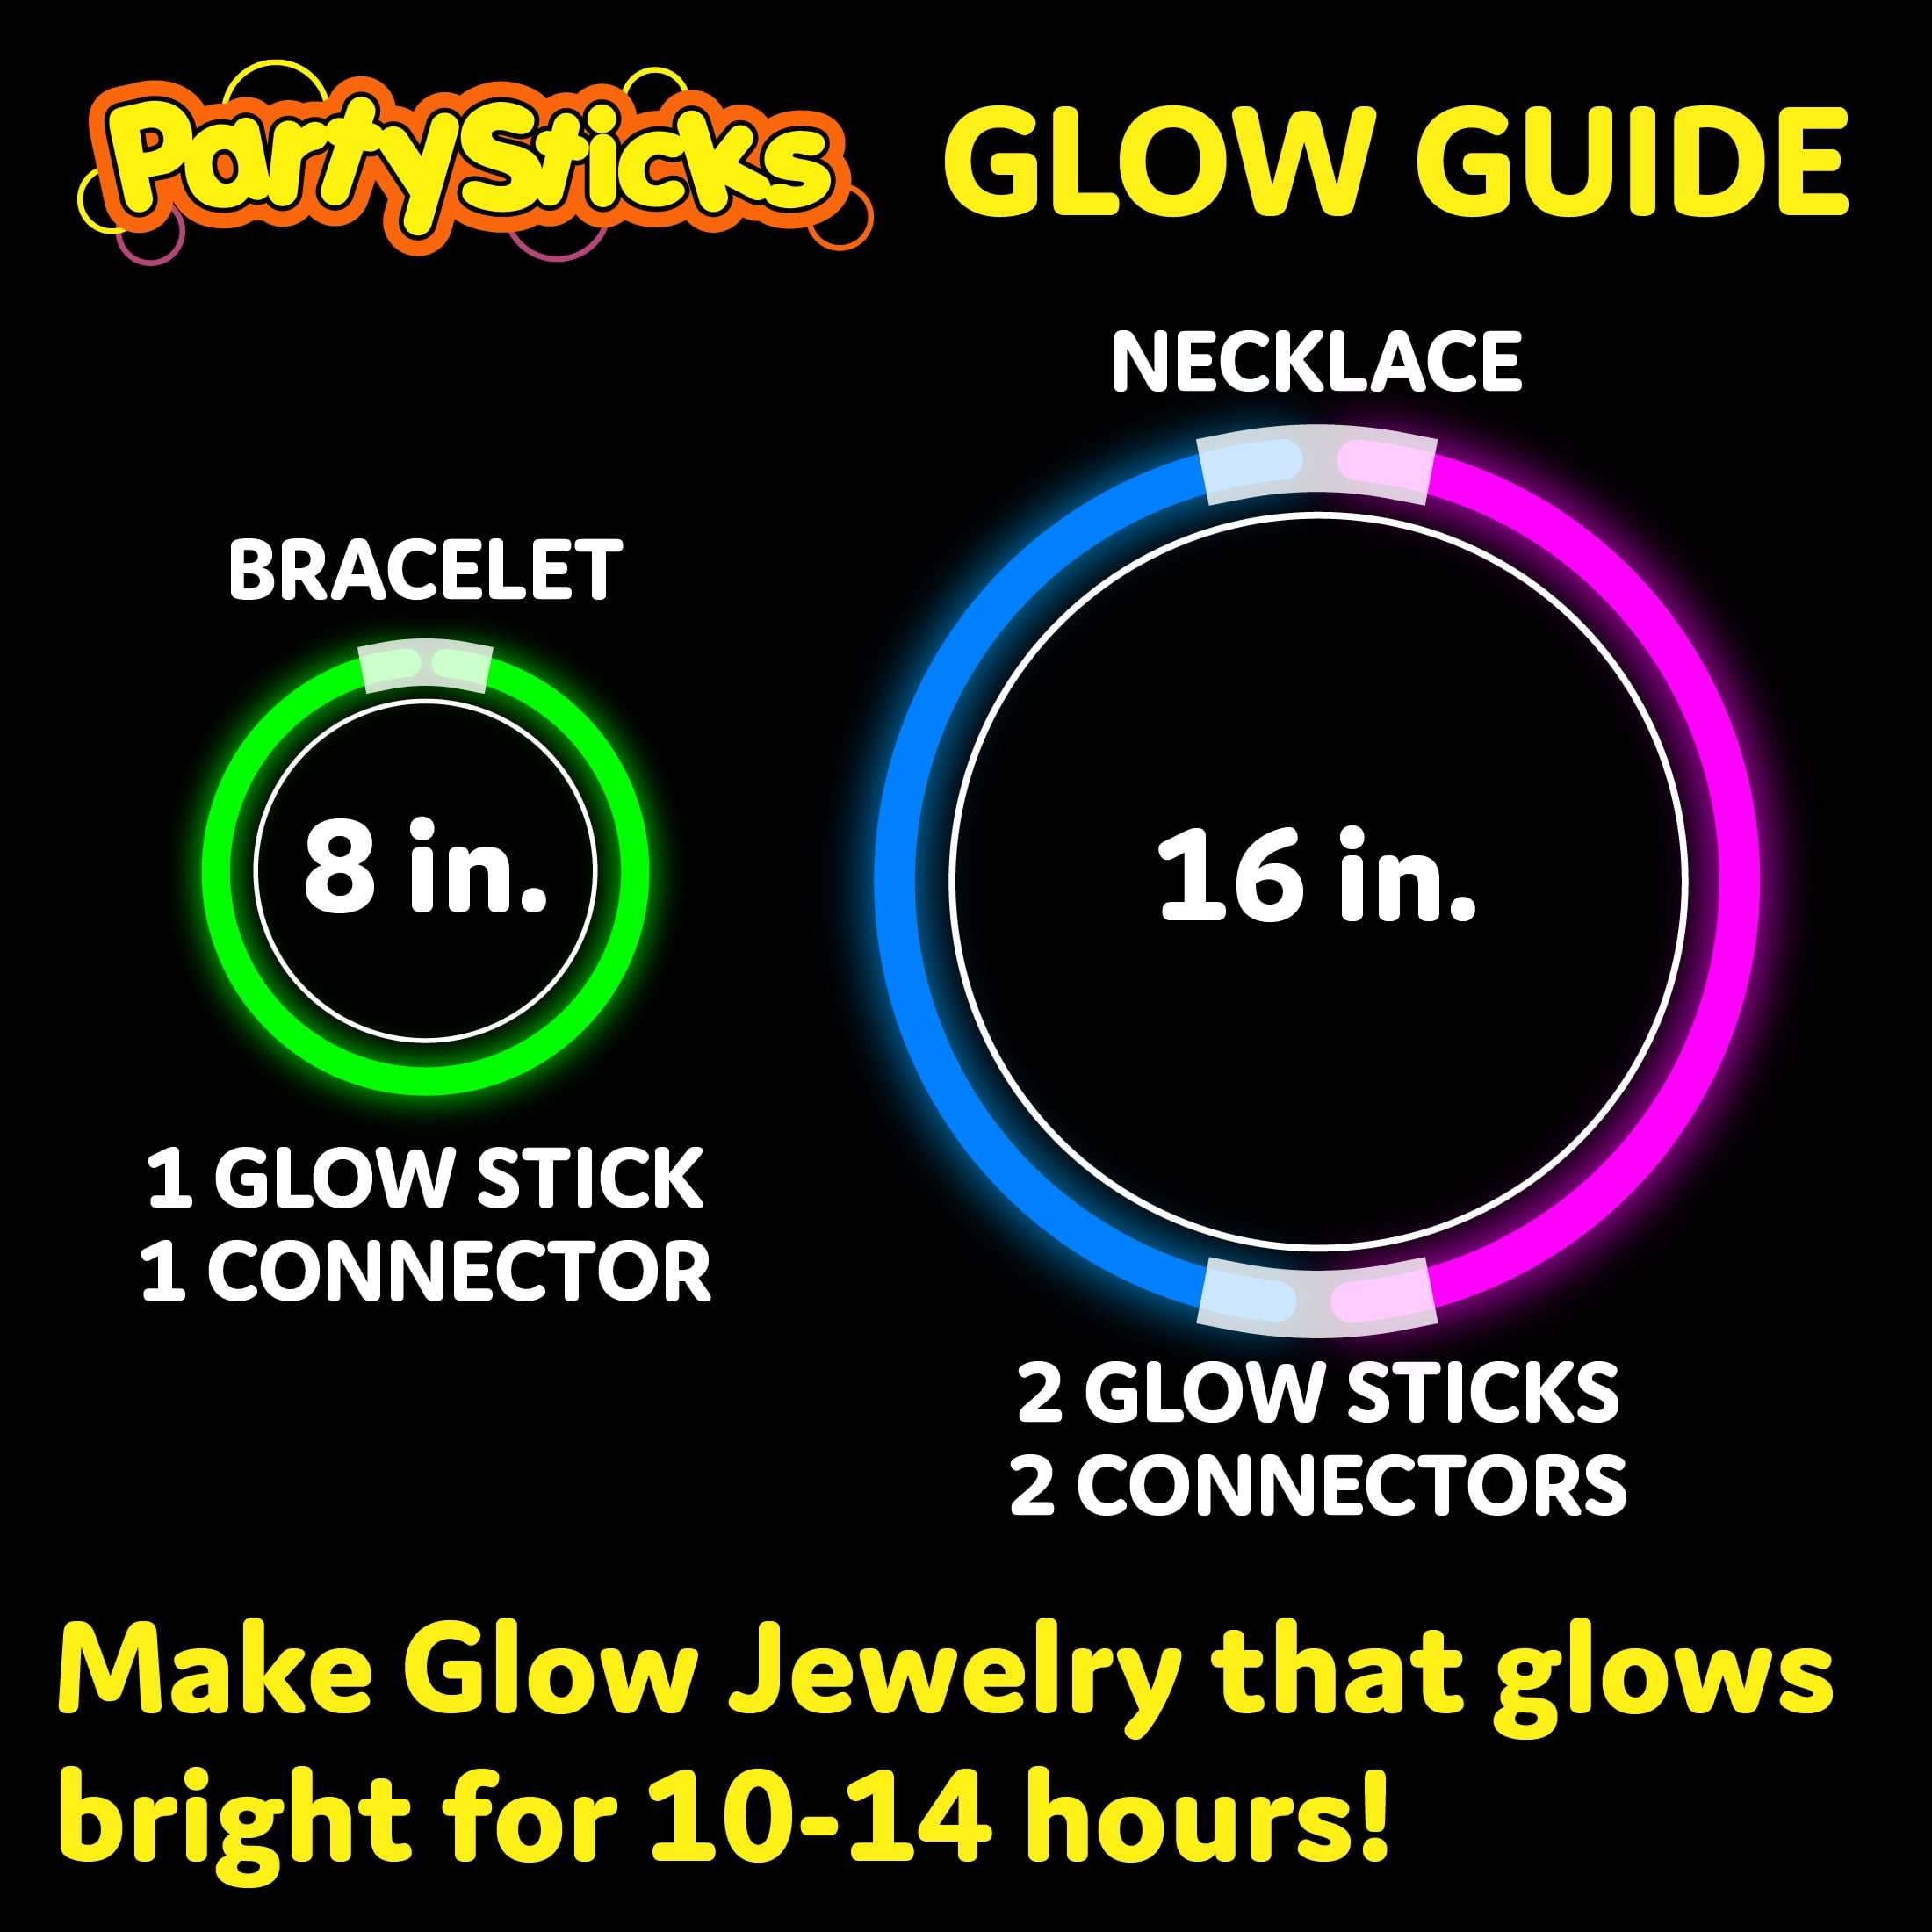 JOYIN 200 Pcs Mini Glow Sticks Bulk with 8 Colors for New Years Eve Party Supplies, Glow-in-the-Dark, Easter Basket Stuffers, Easter, Christmas